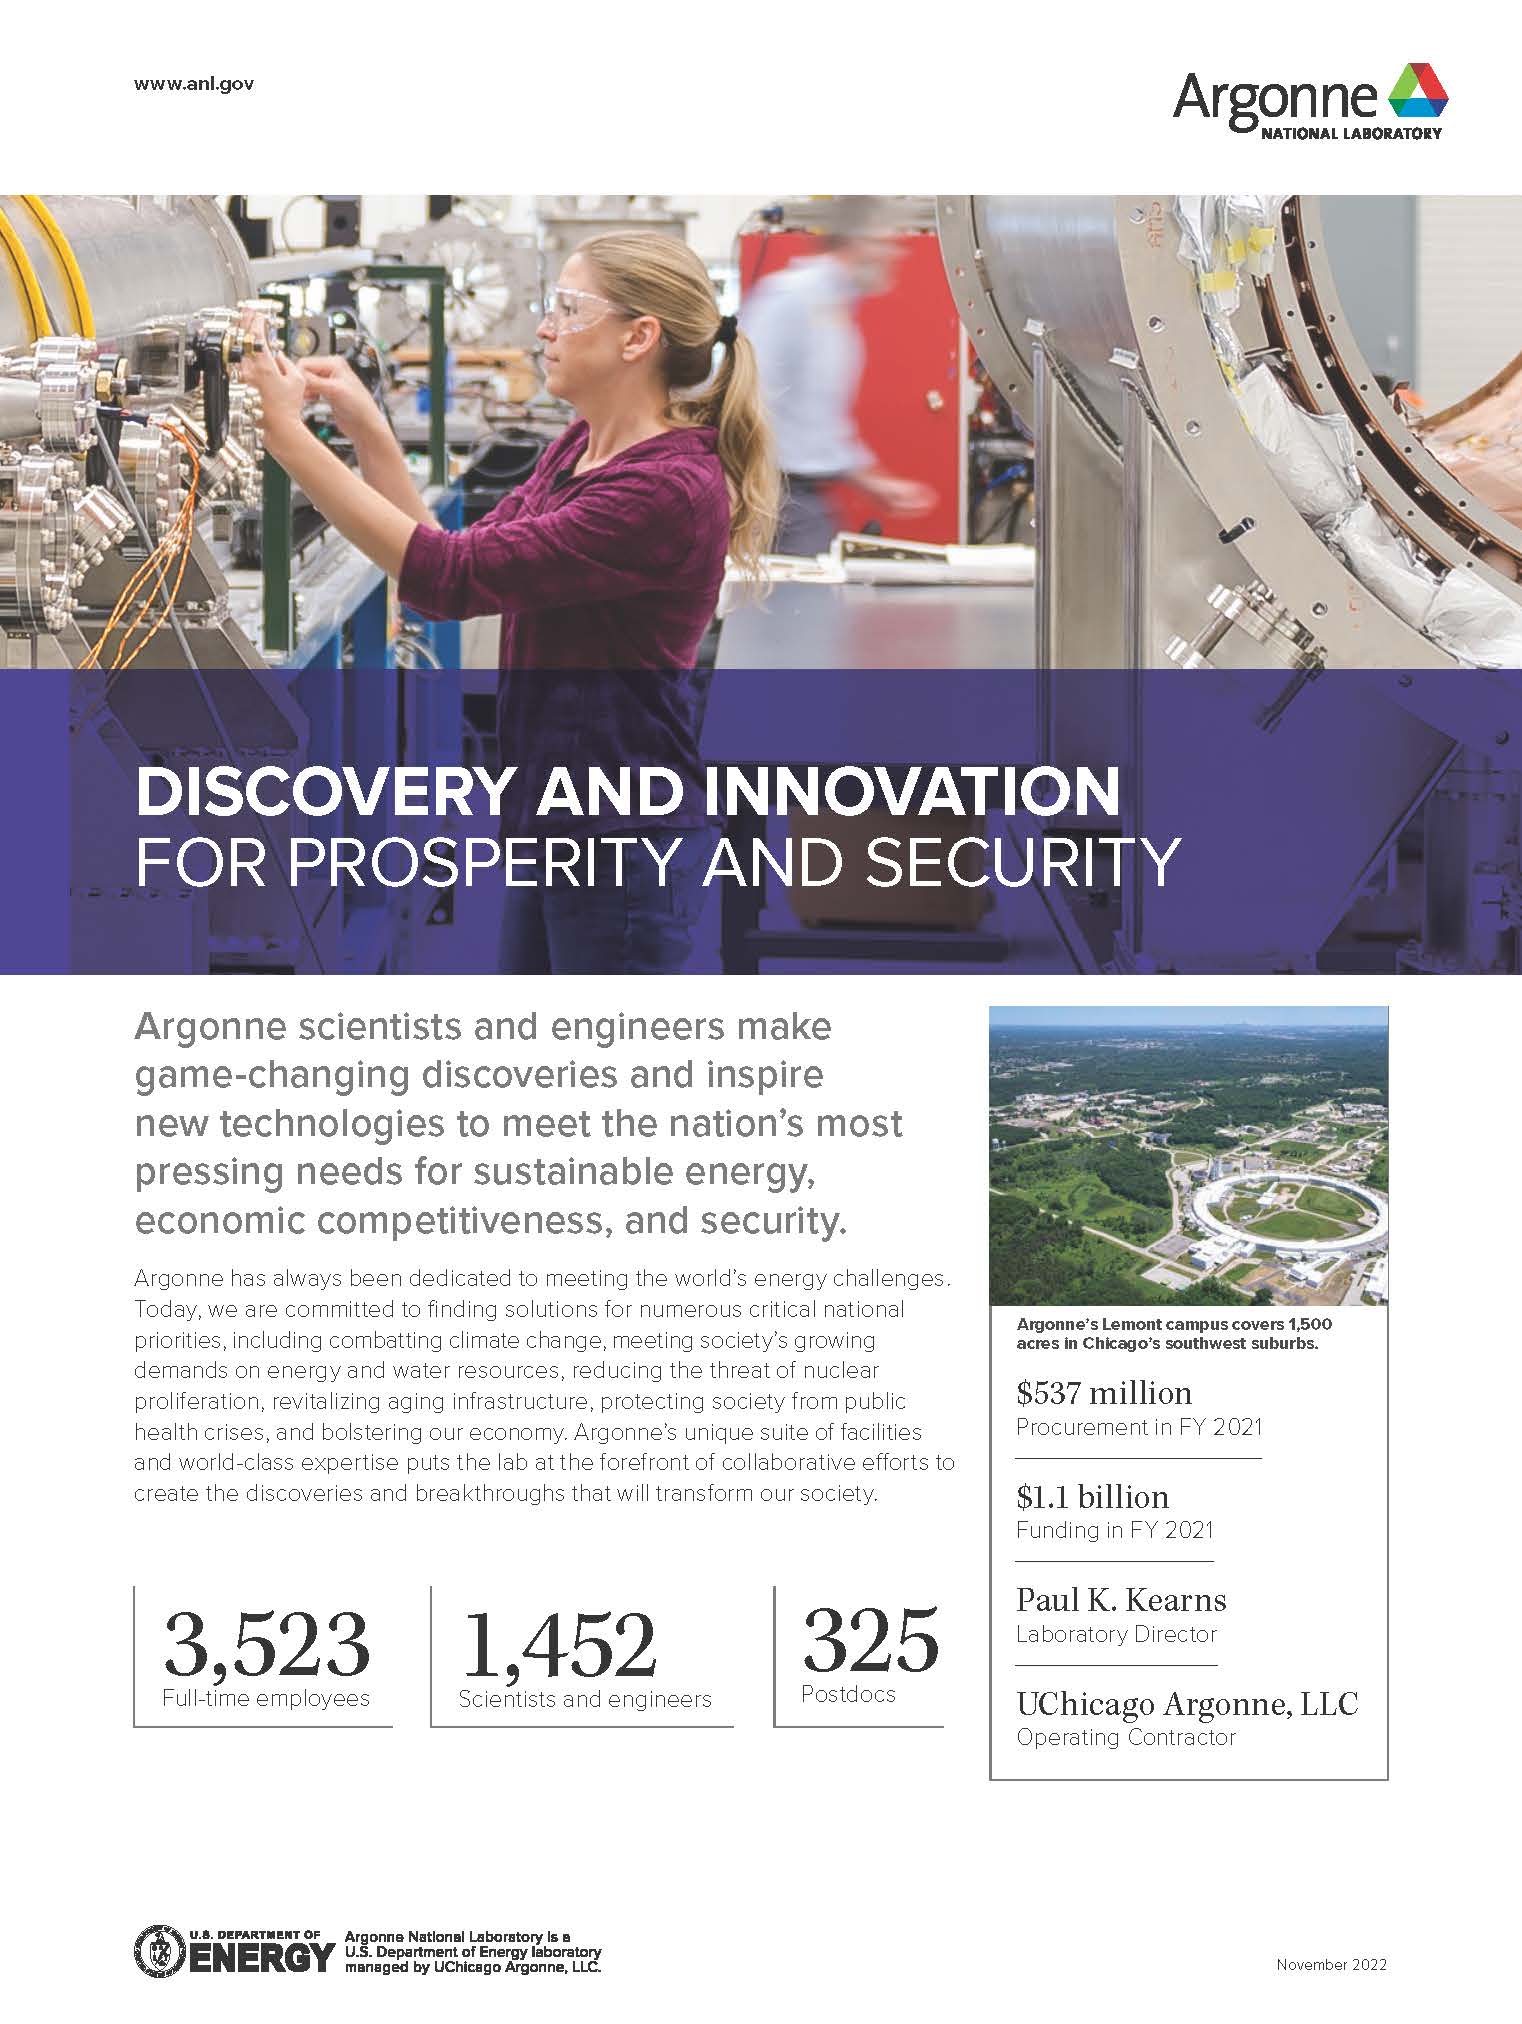 Header image of female scientist working in a lab on overview factsheet for Argonne National Laboratory.